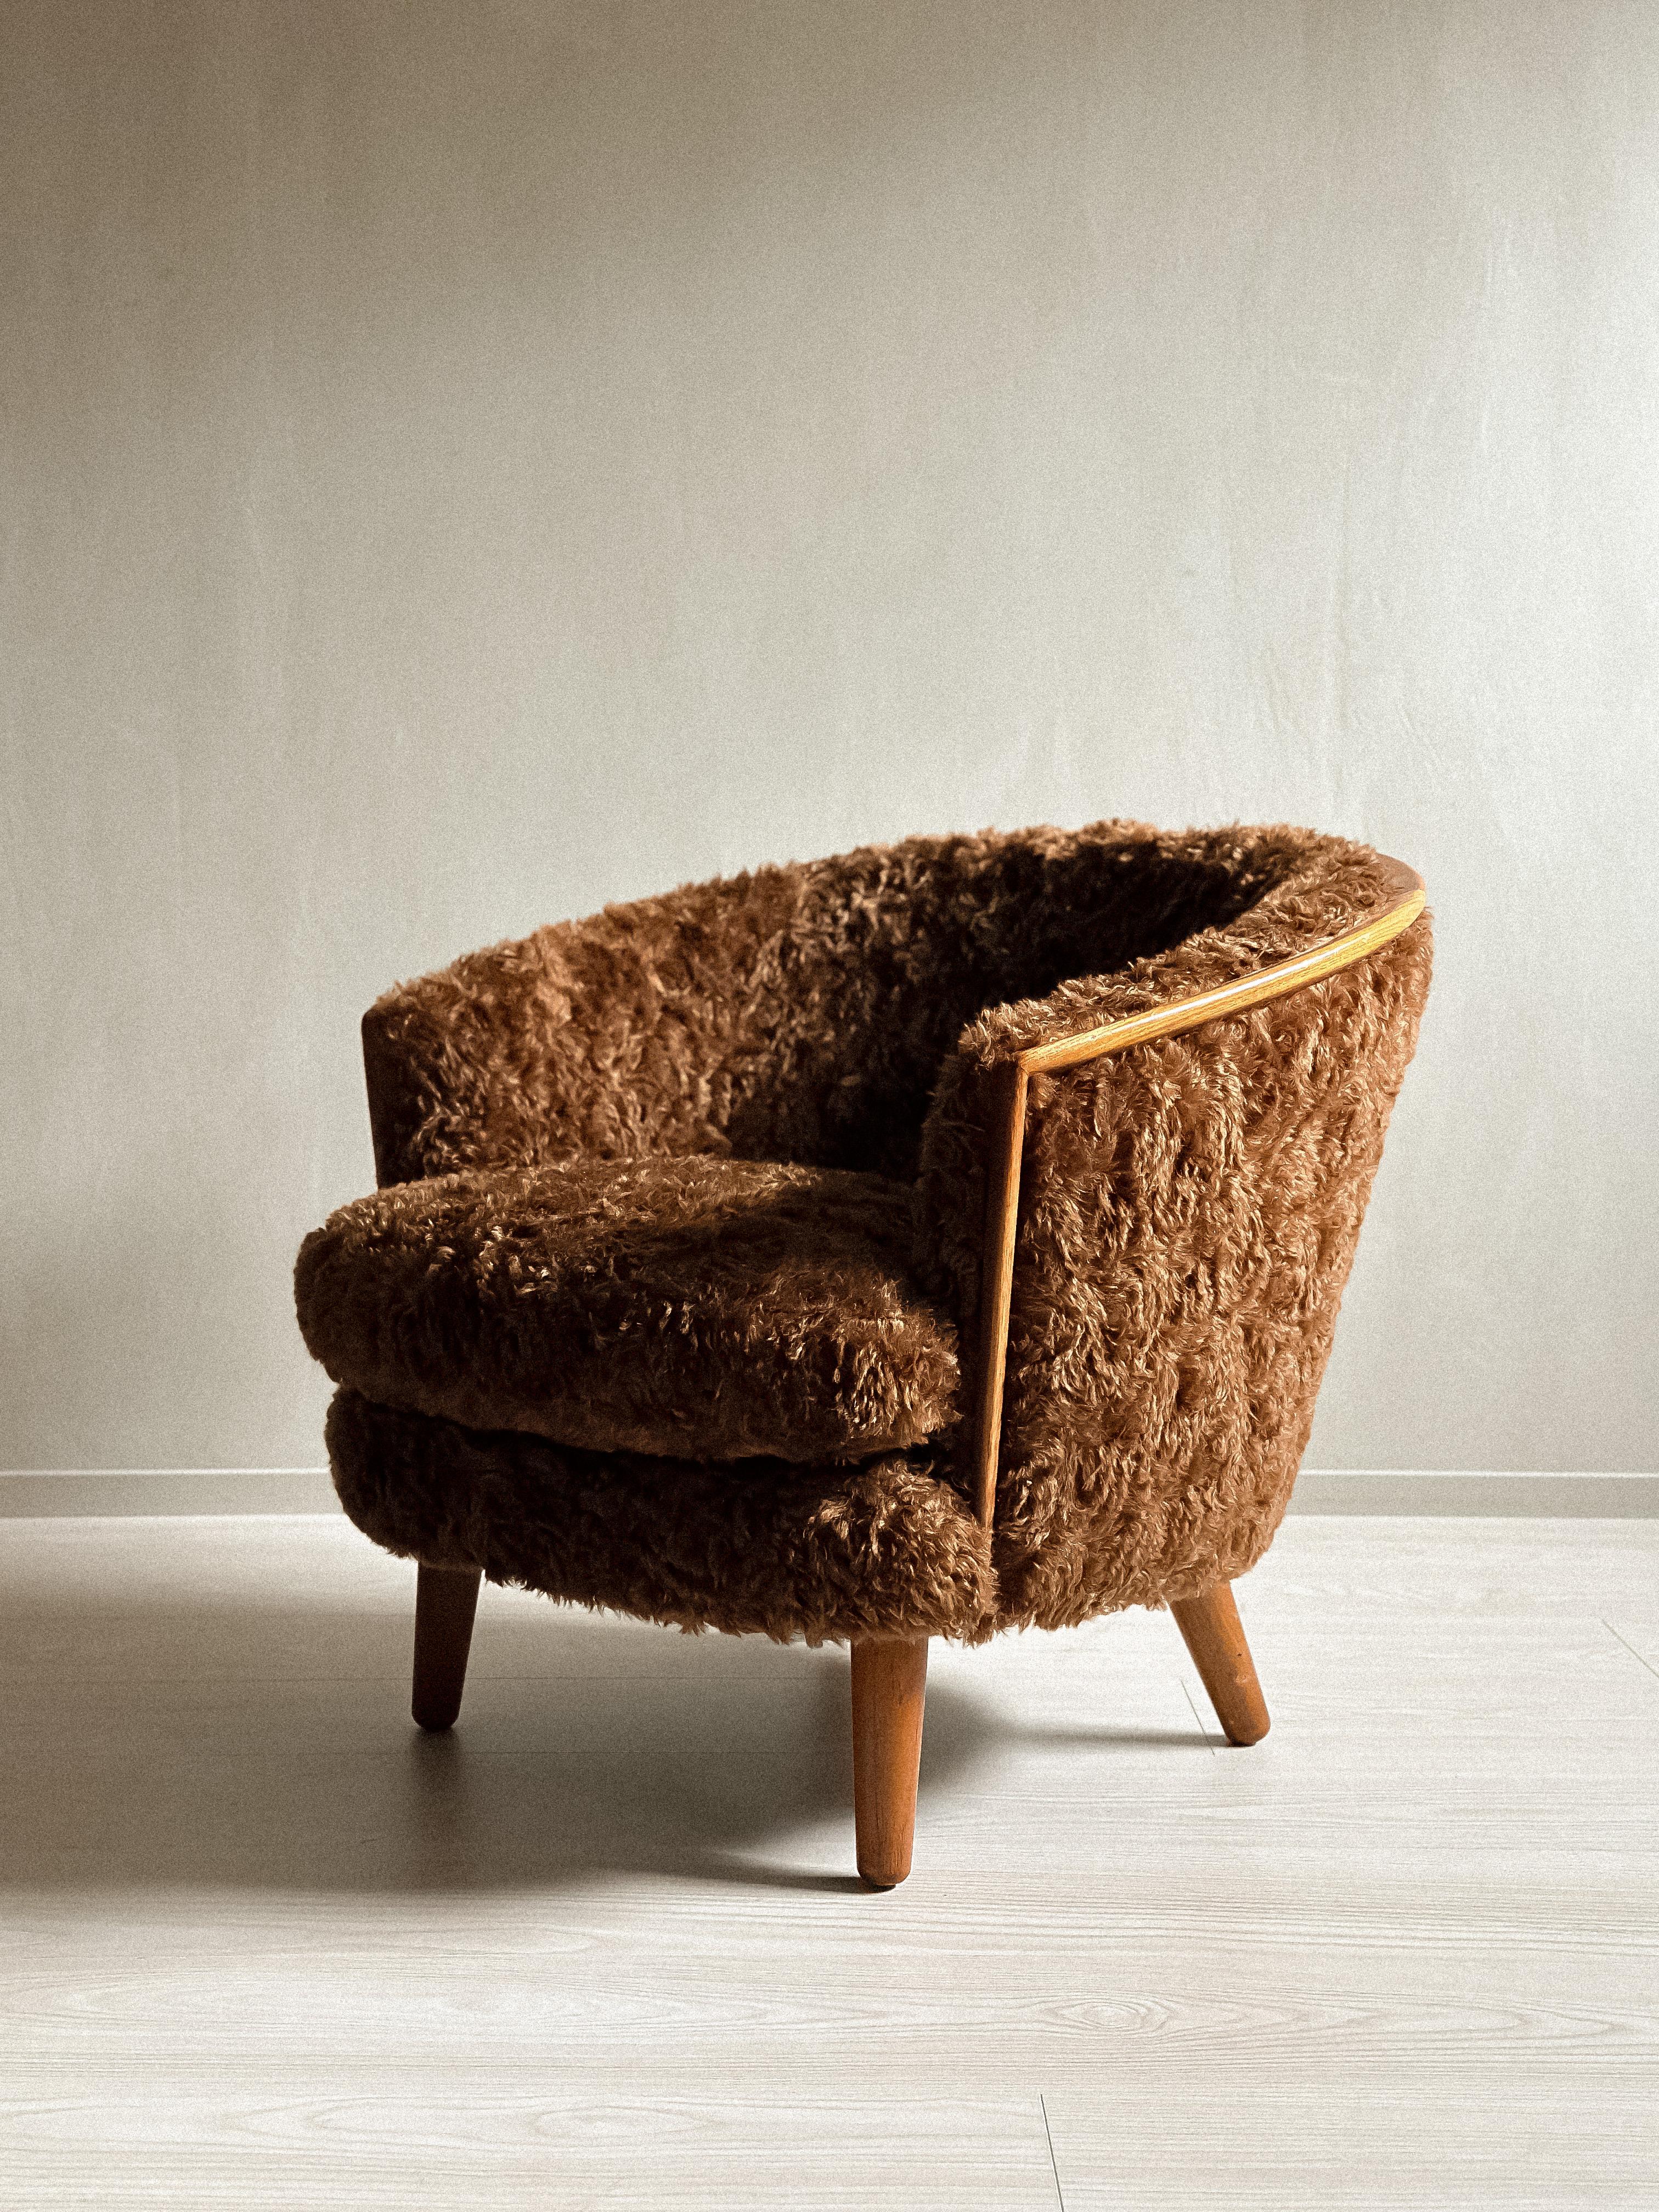 This is a beautiful mid-century Egg Chair designed by P.I. Langlo of Norway in the 1950s. This chair has been newly reupholstered in a luxurious longhair mohair fabric in a rich silky brown color, designed by Raff Simmons and supplied by Kvadrat.